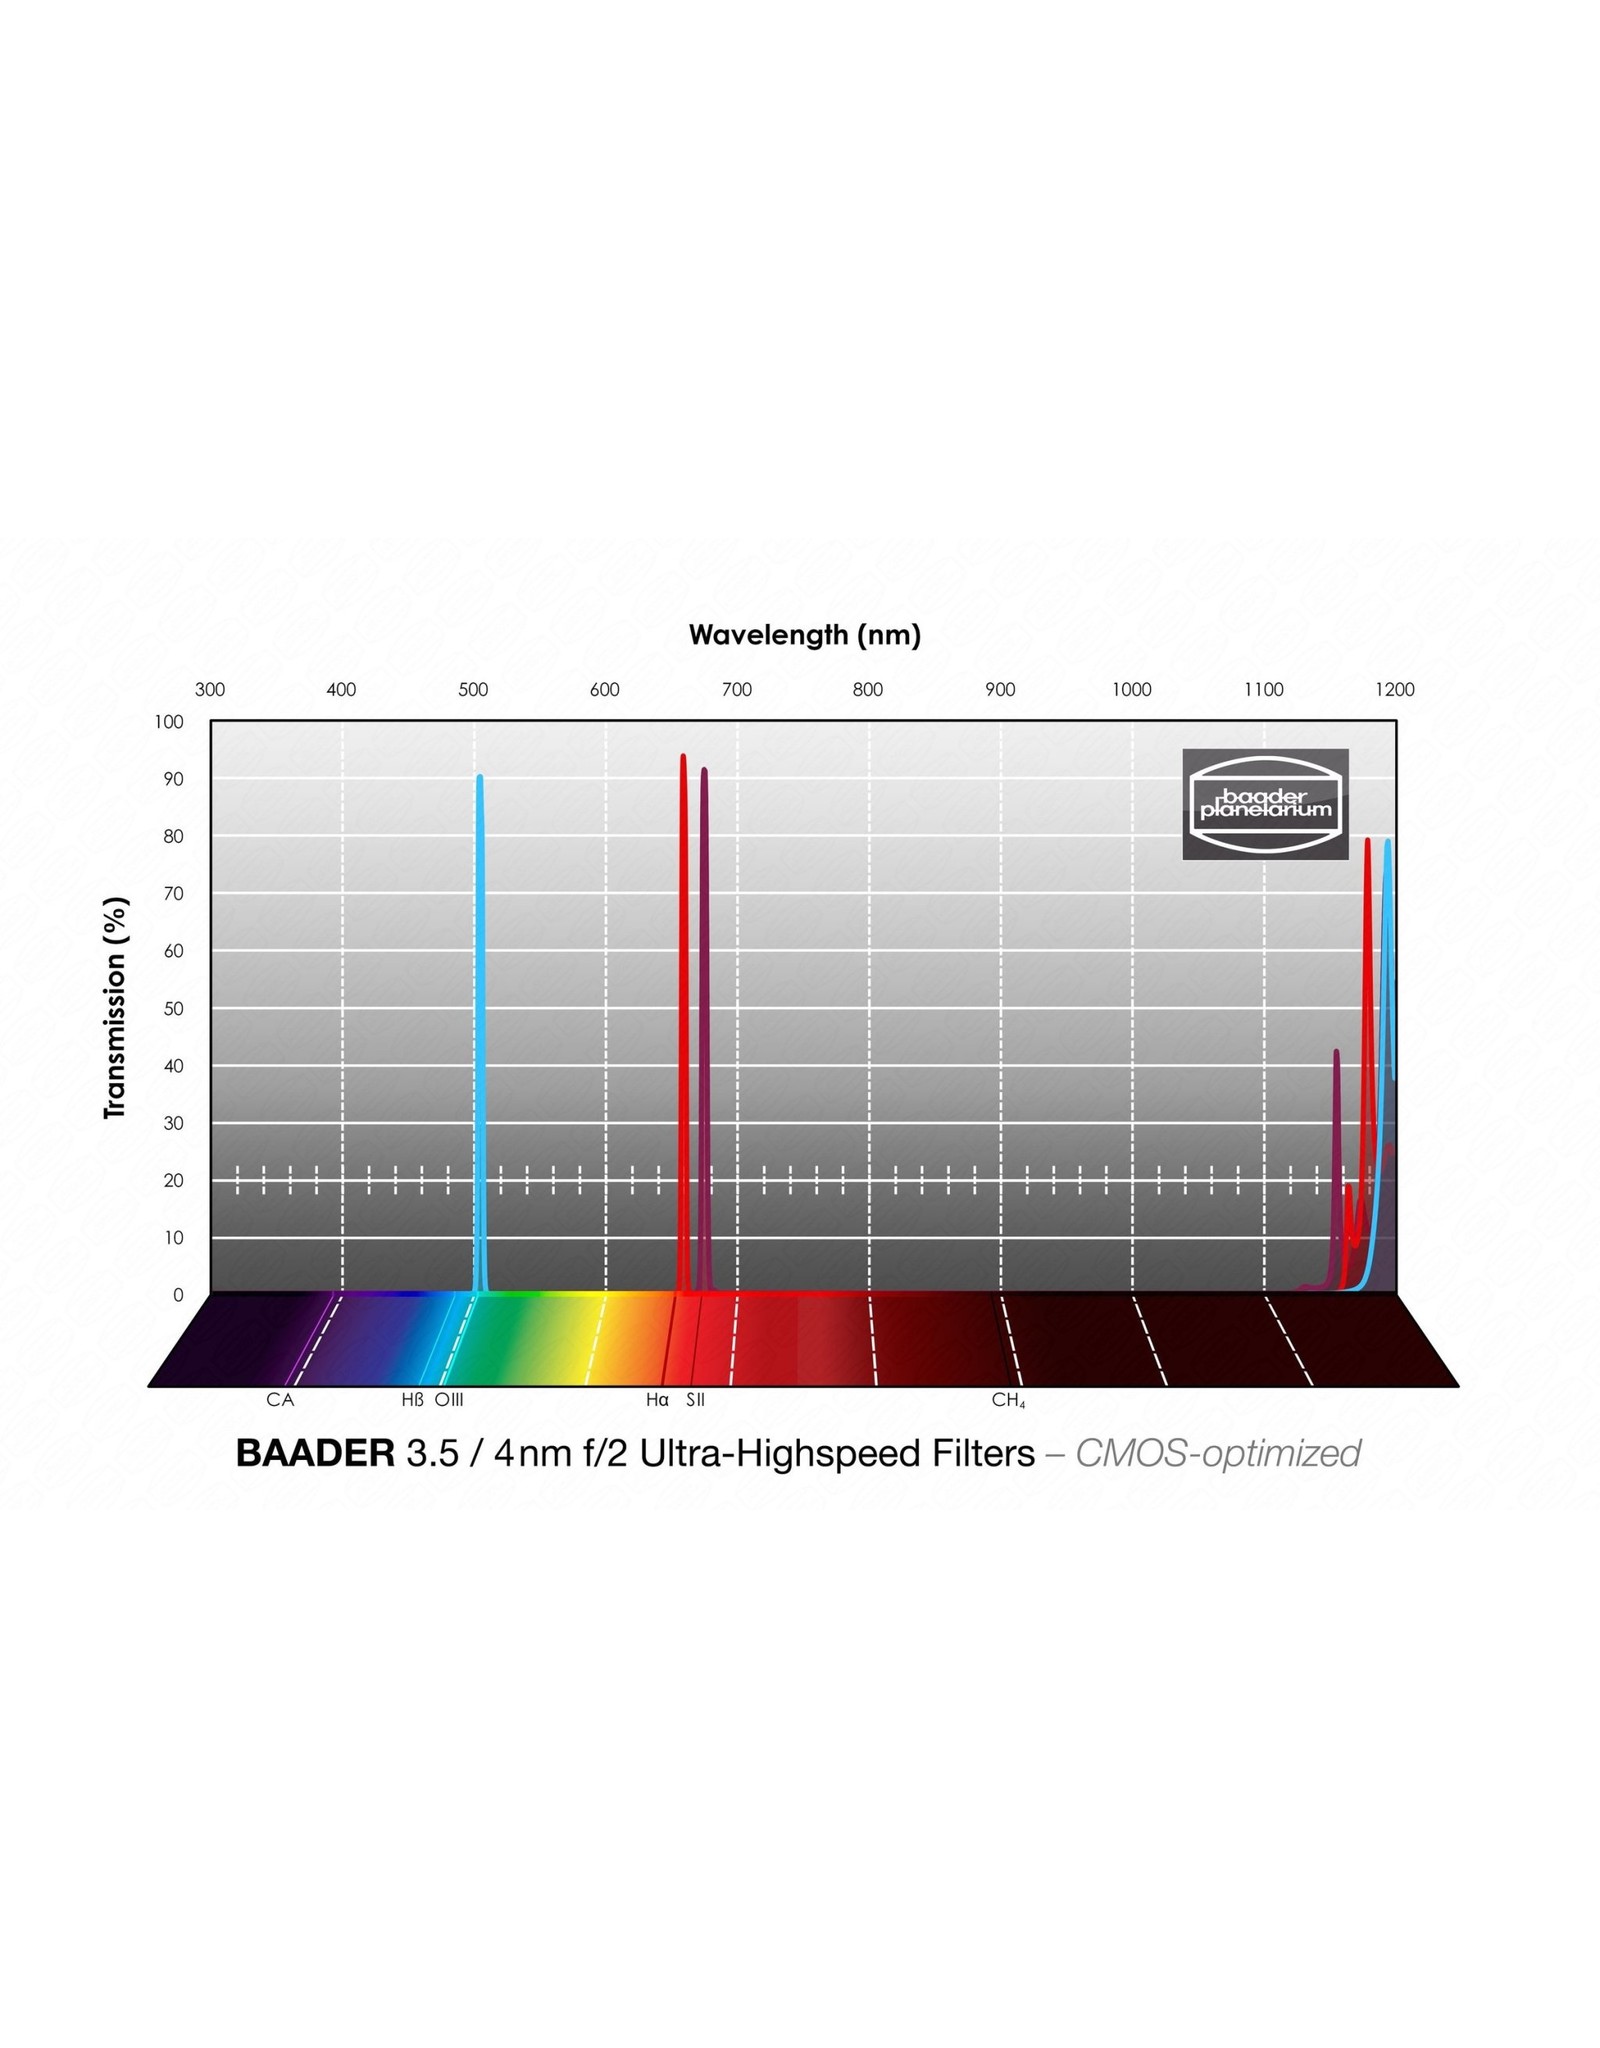 Baader Planetarium Baader 4nm f/2 Ultra-Highspeed Filters – CMOS-optimized (Specify Size)